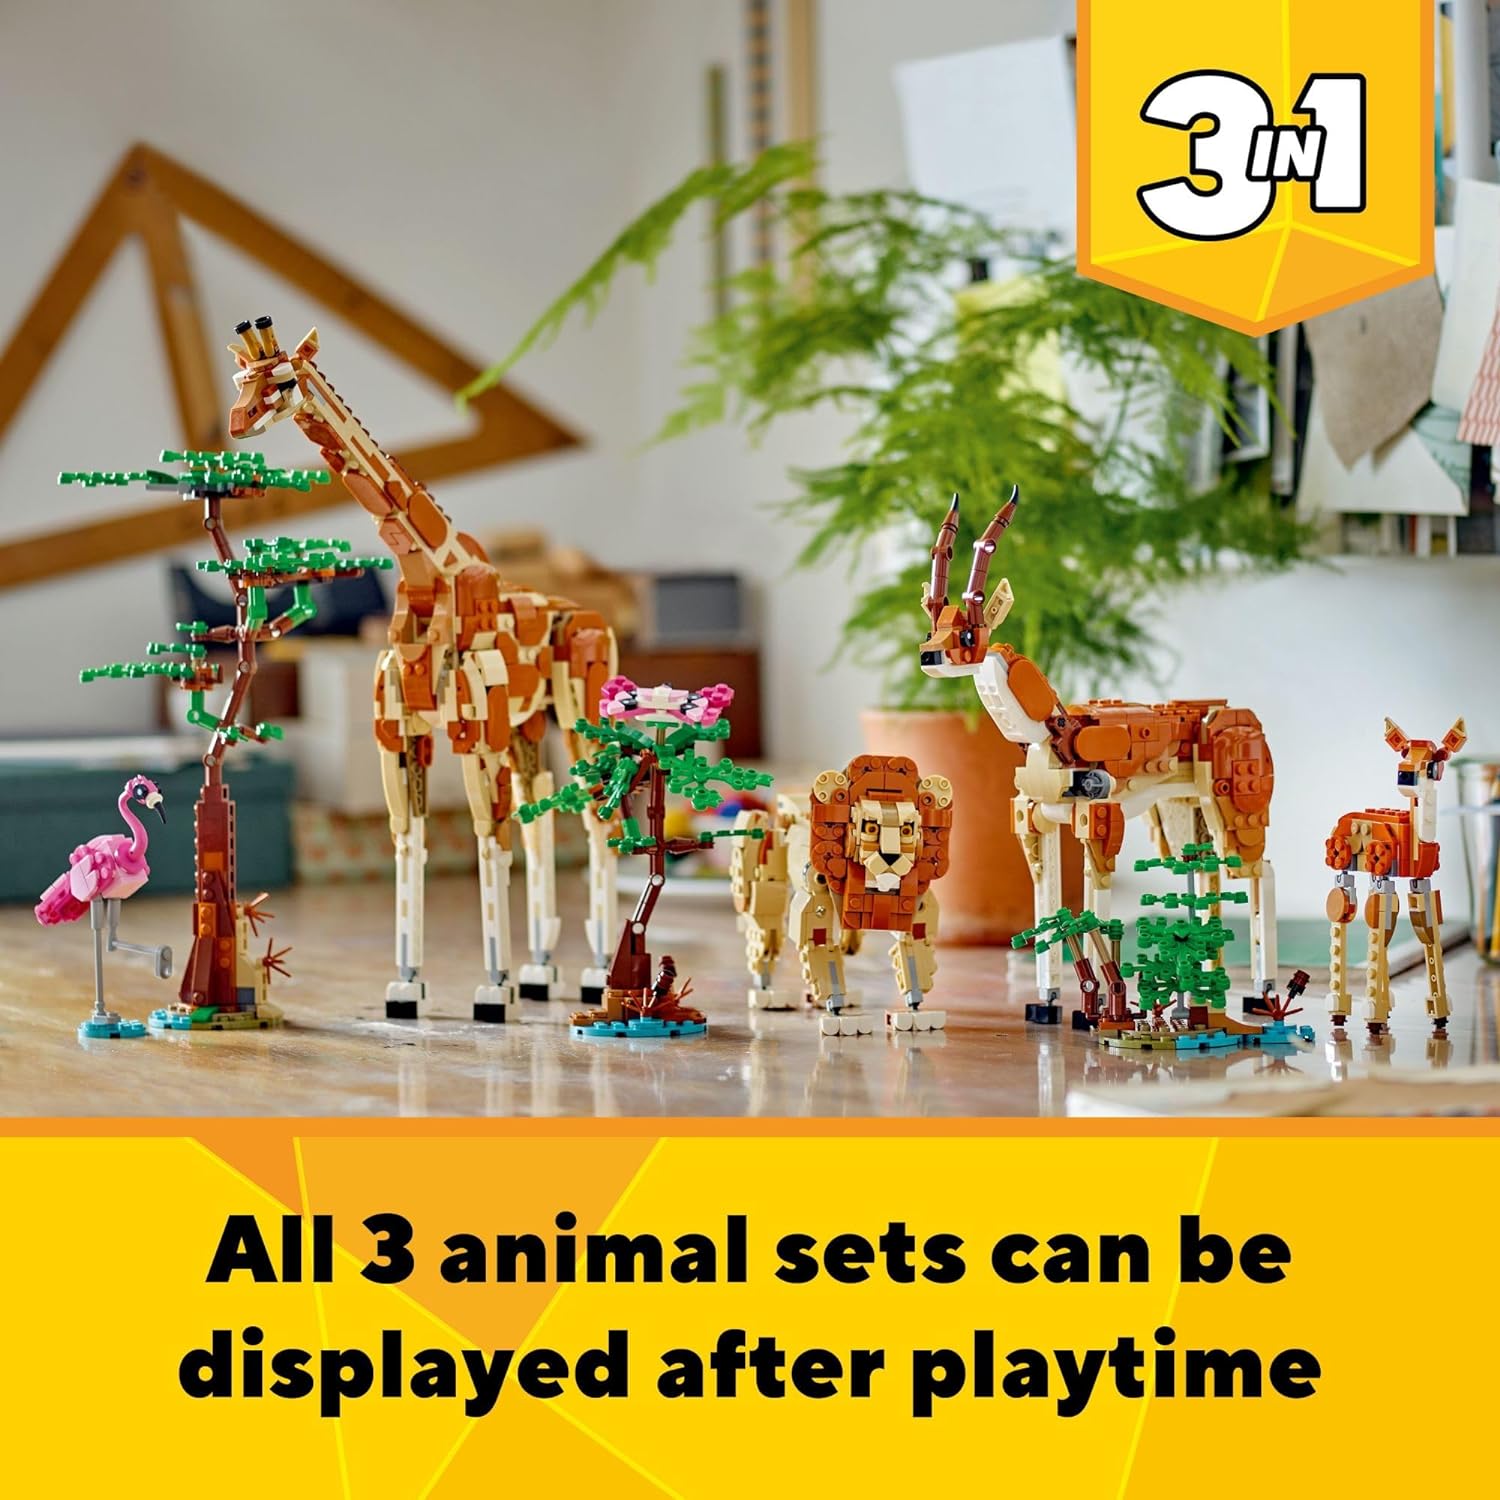 LEGO 31150 Creator 3 in 1 Wild Safari Animals, Rebuilds into 3 Different Safari Animal Figures - Giraffe Toy, Gazelle Toy or Lion Toy, Nature Toy, Building Set for Kids.